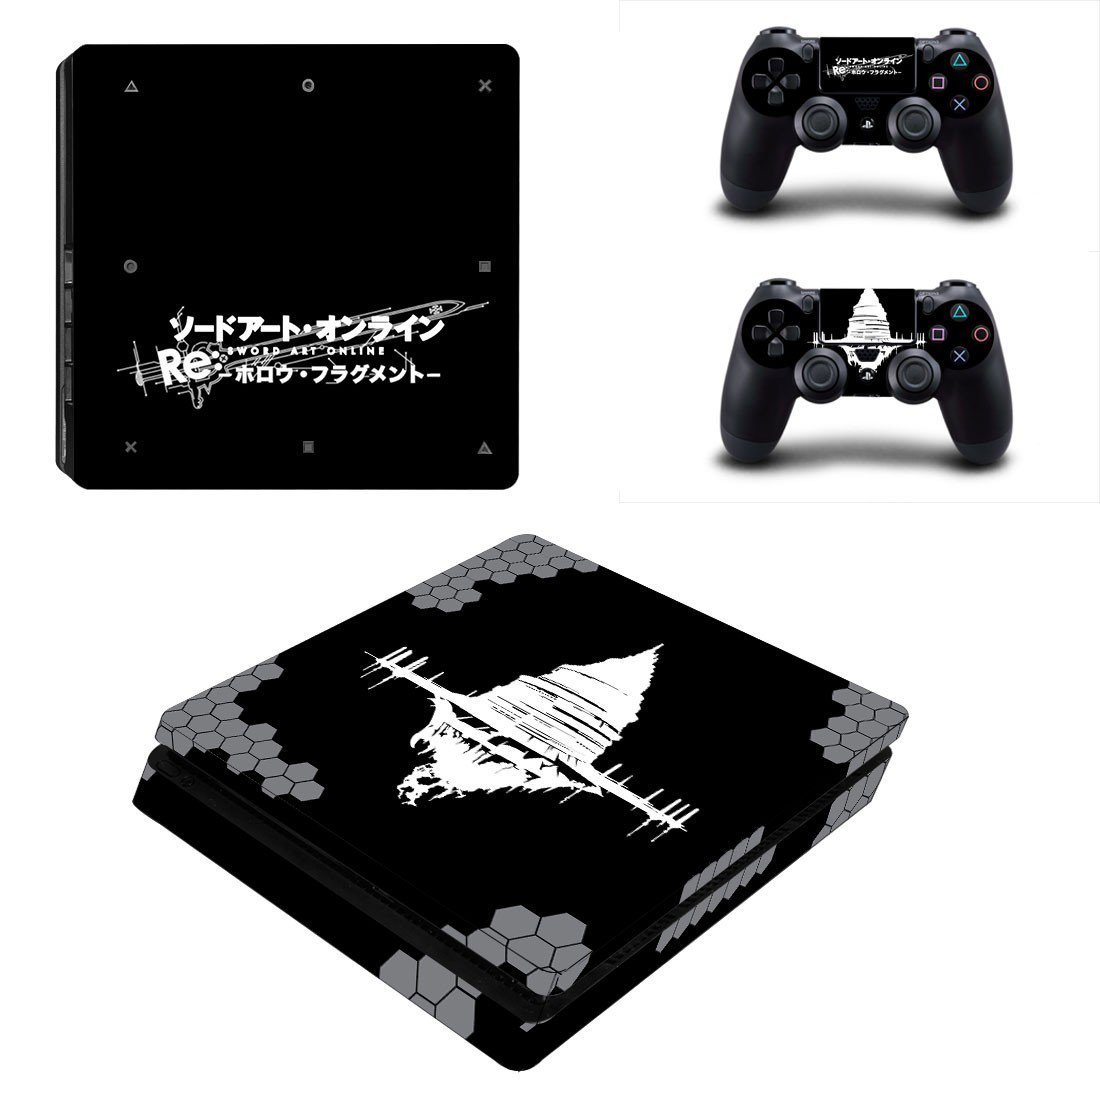 PS4 Slim And Controllers Skin Sticker -Sword Art Online